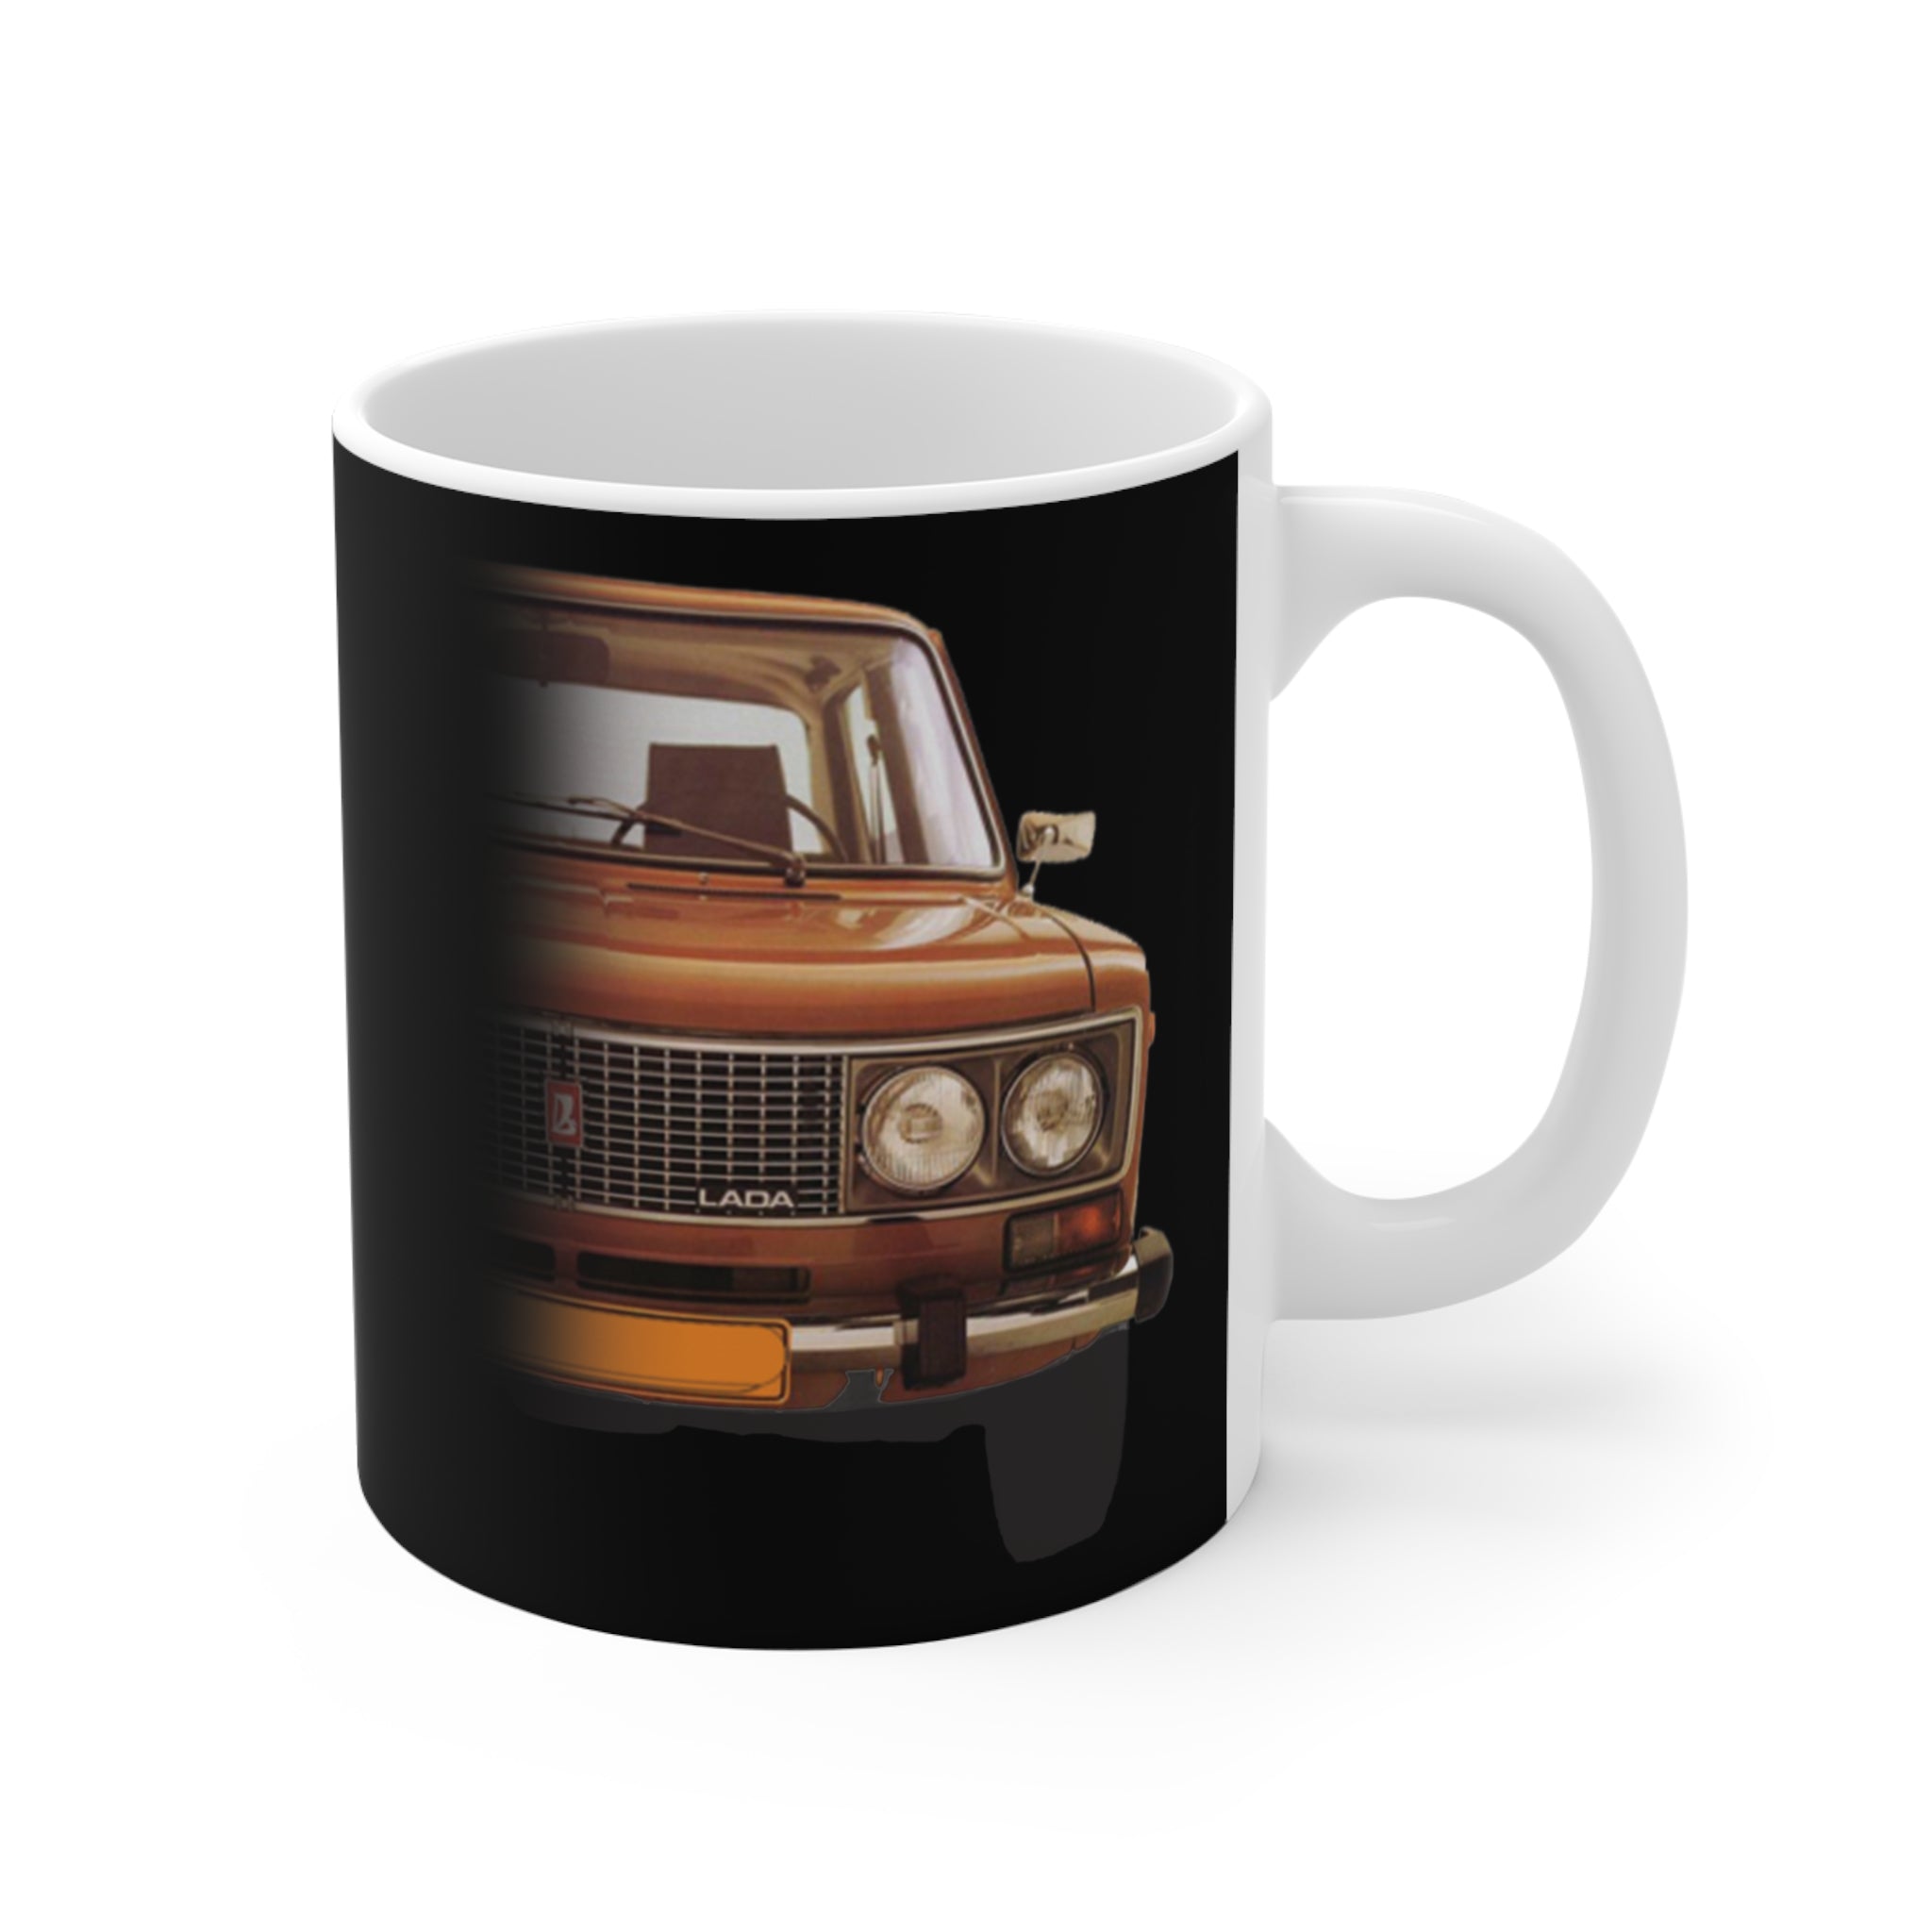 This is Kruto CAR Coffee Cup